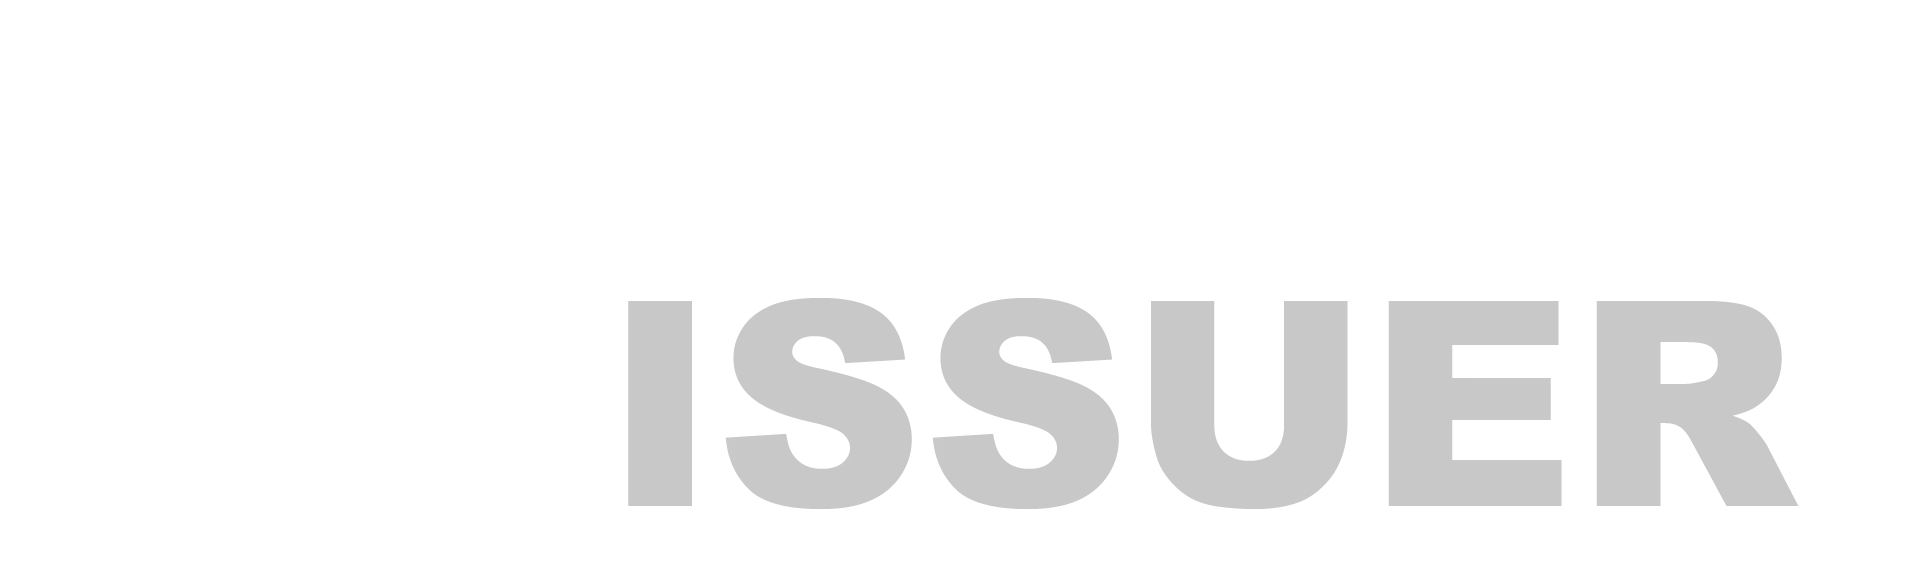 Nordic Issuer company logo with transparent background